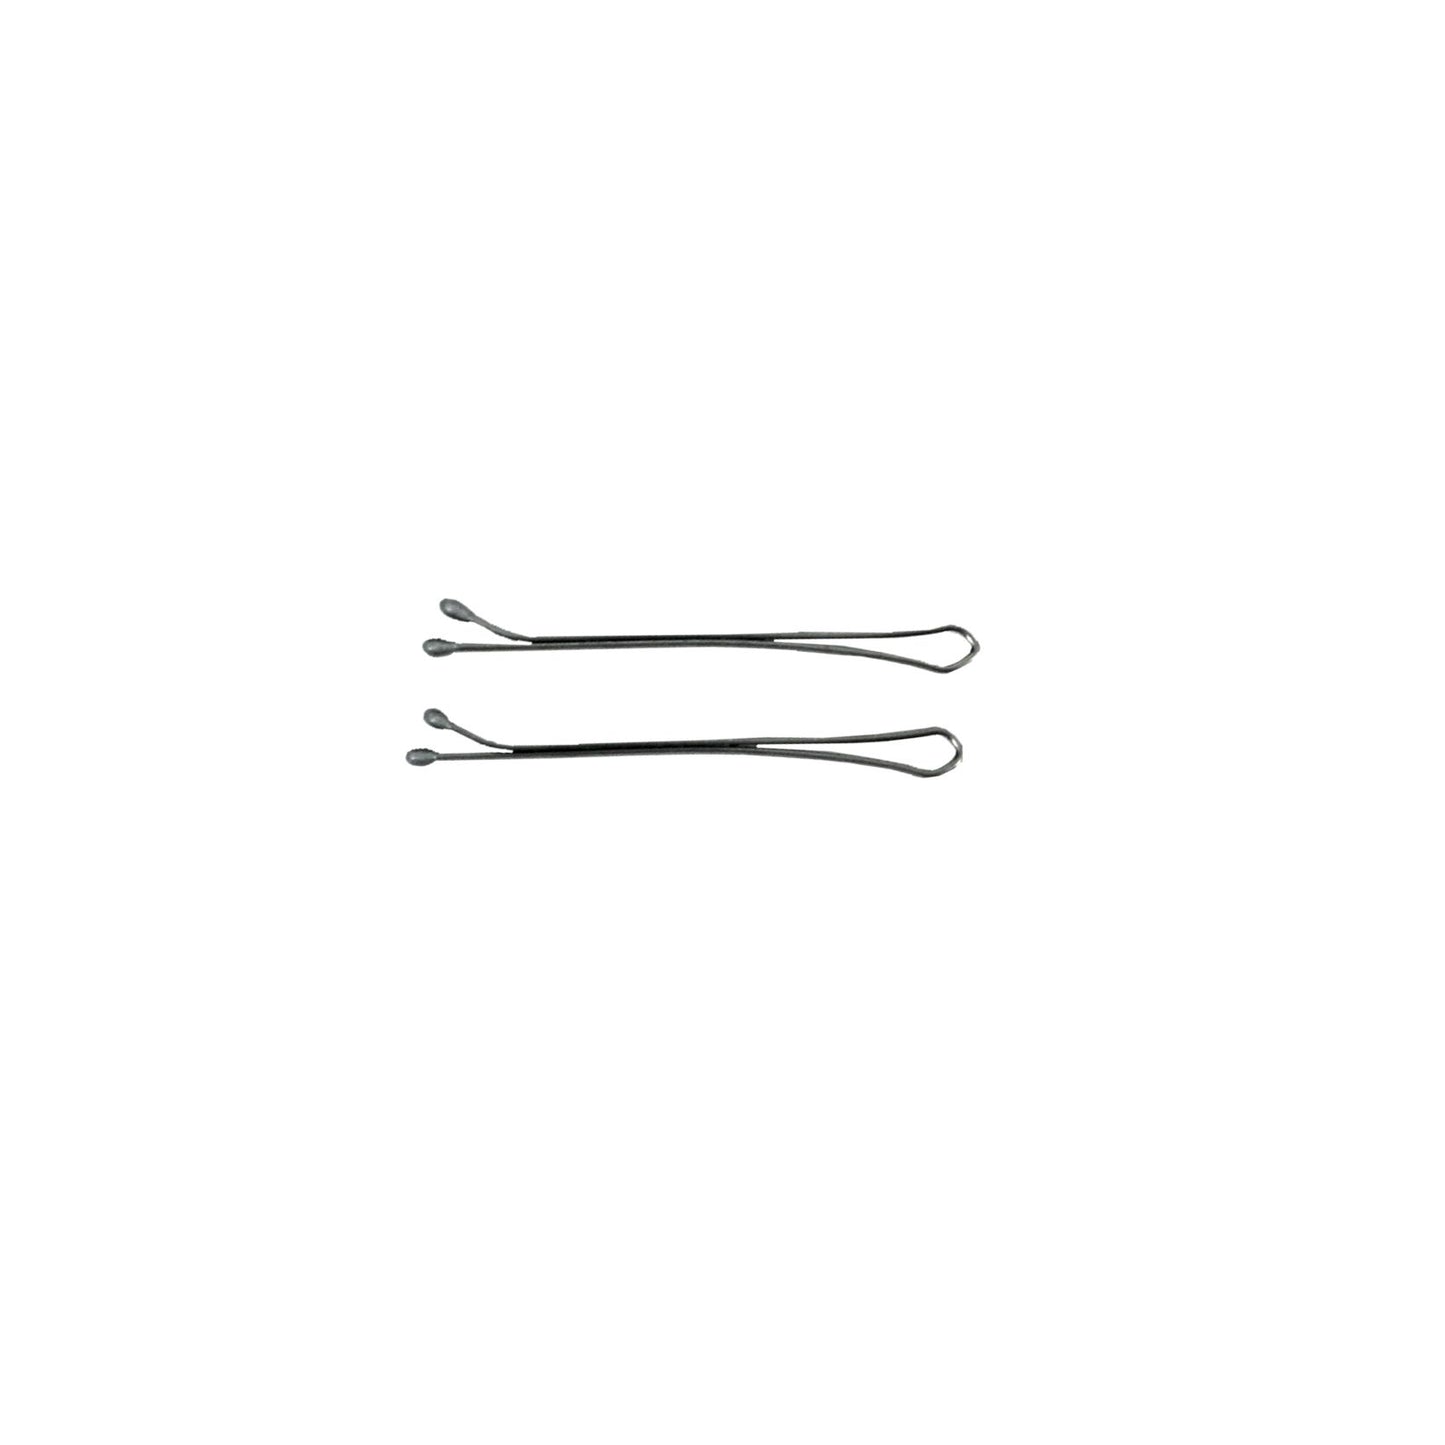 500, Grey, 1.6in (4.0cm), Flat Italian Made Bobby Pins, Recloseable Stay Clean and Organized Container